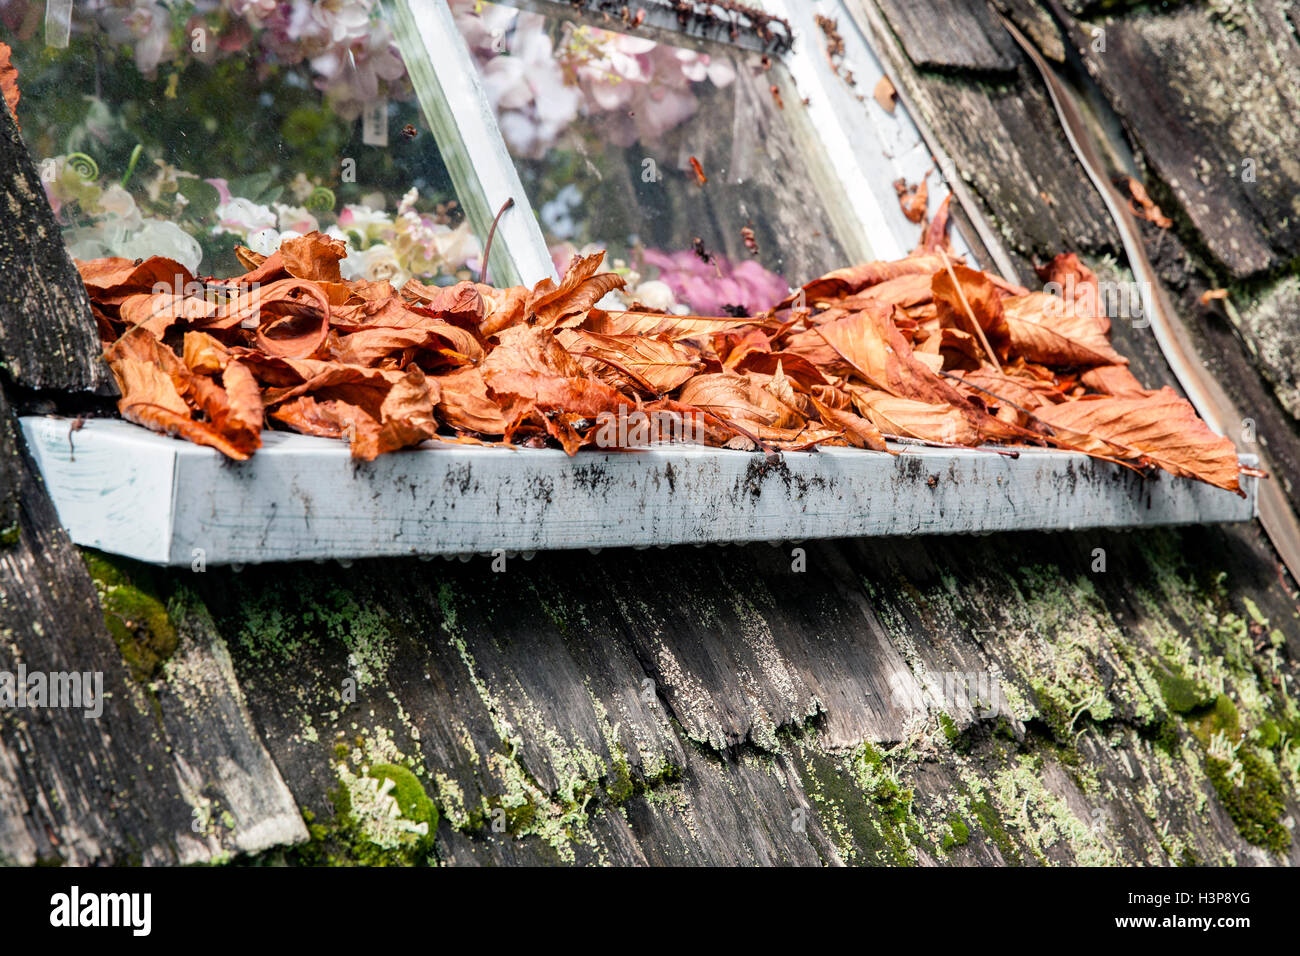 Fall Leaves - Old Country Market - Coombs, Vancouver Island, British Columbia, Canada Stock Photo